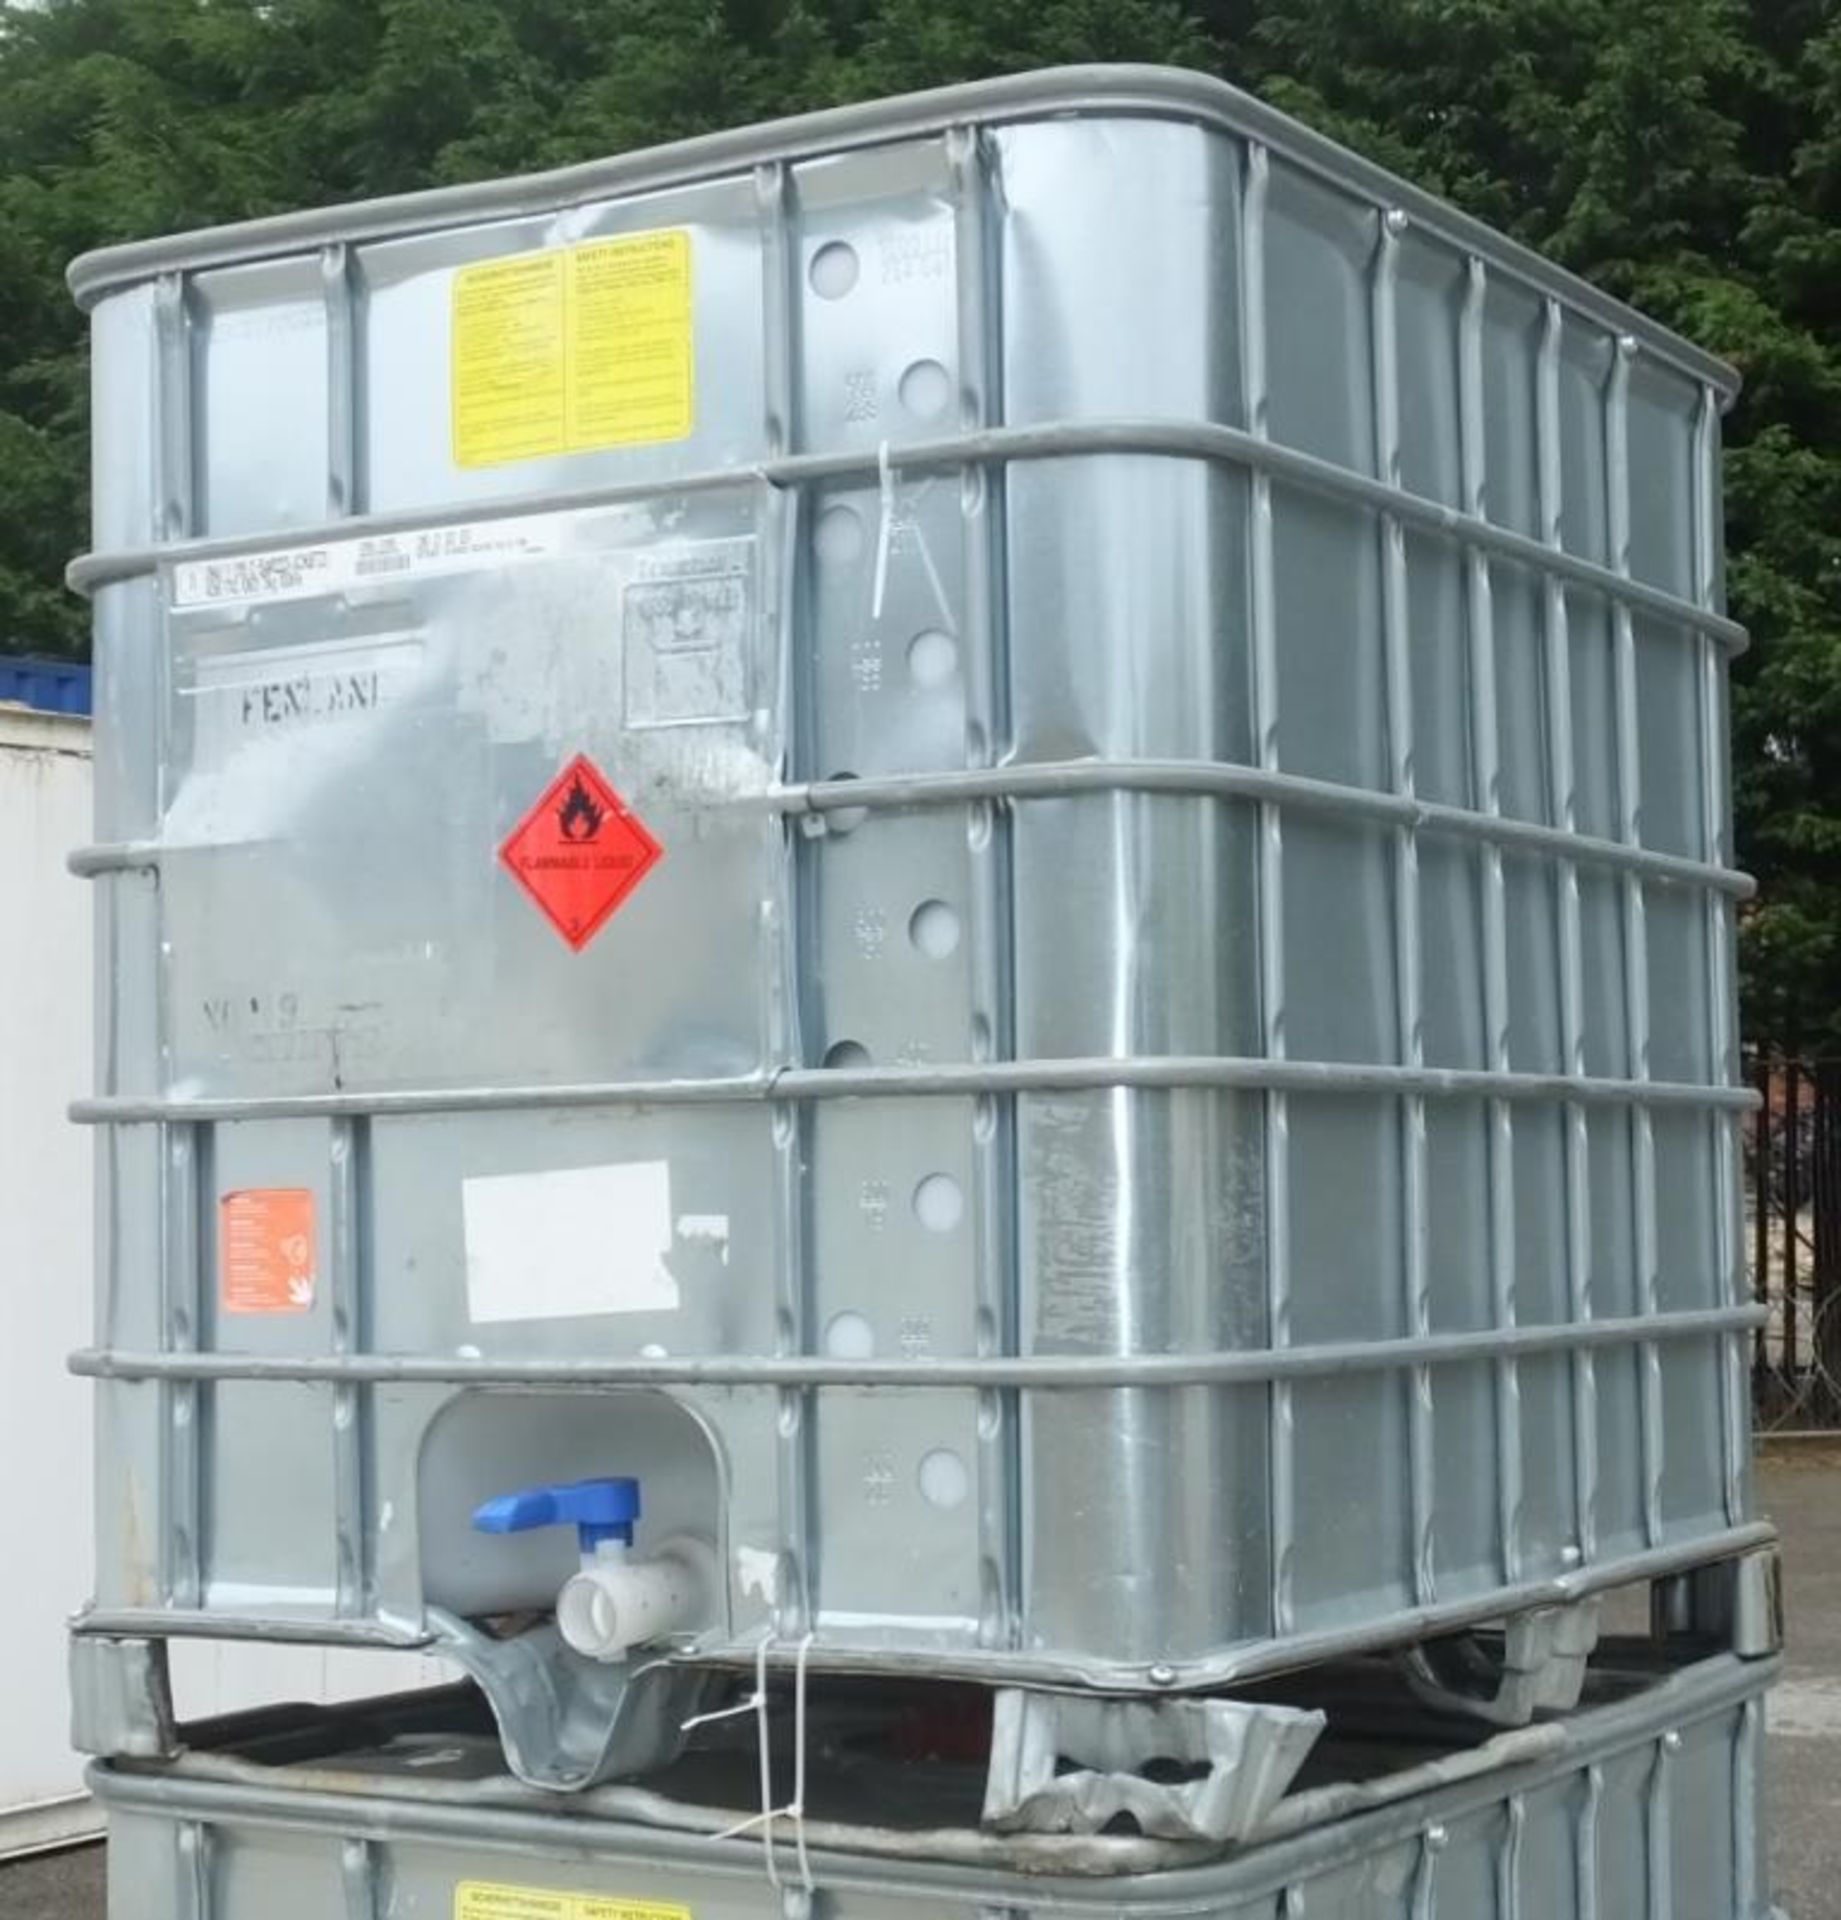 2x Schutz SX EX metal clad and frame IBC 1000LTR plastic containers - Image 3 of 4